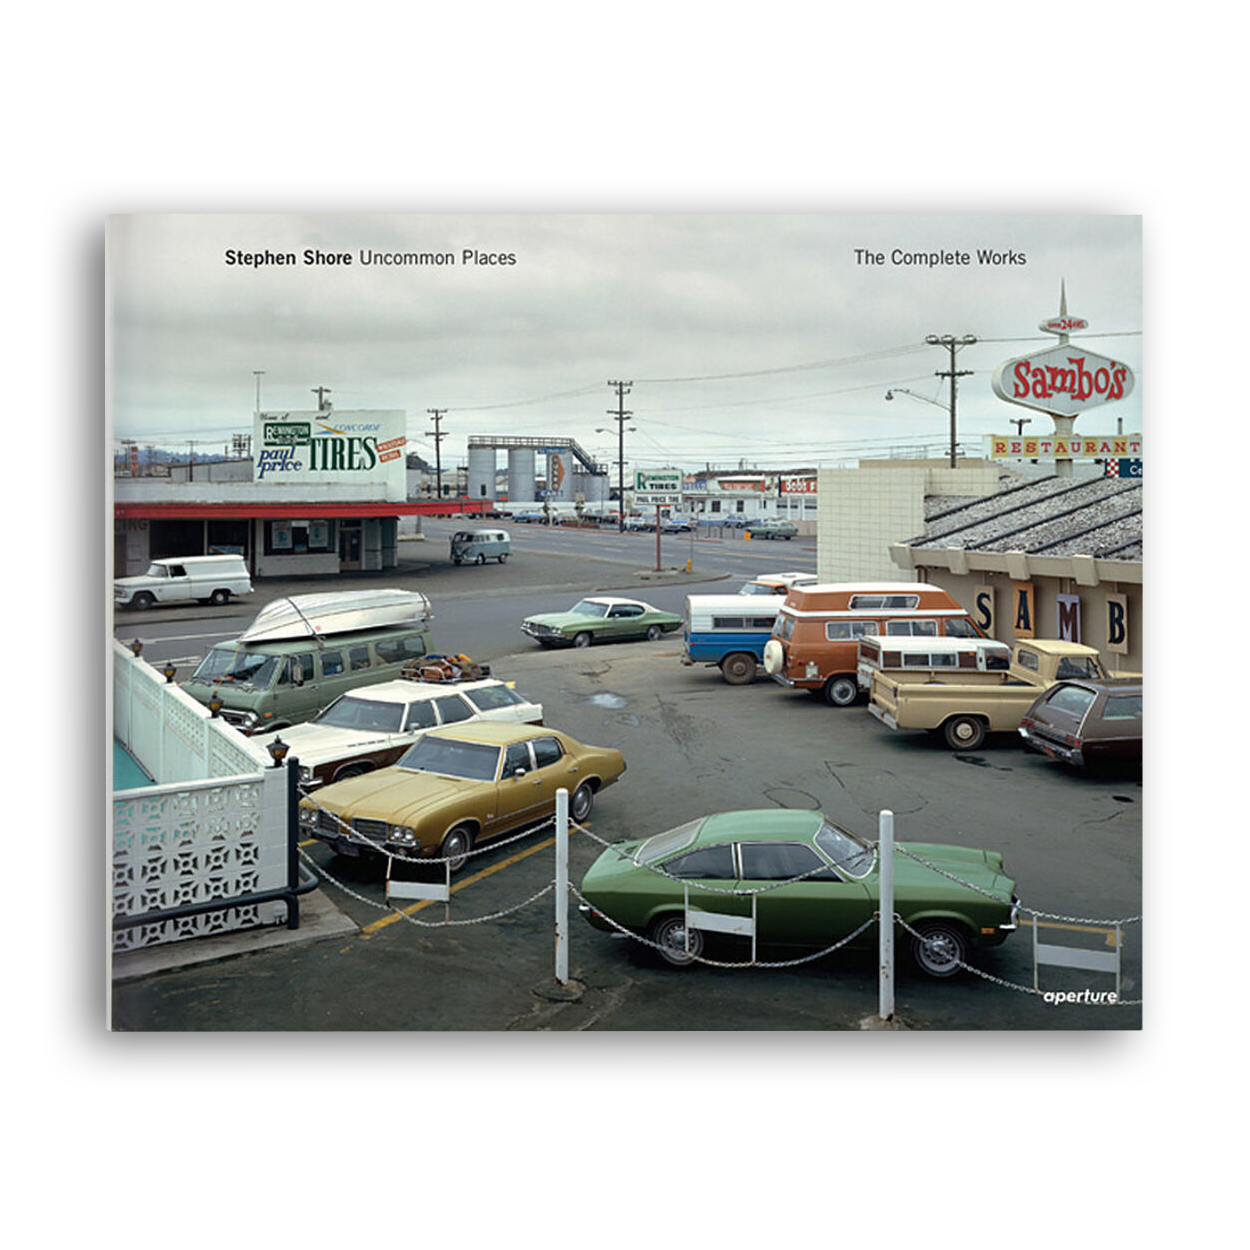 Stephen Shore: Uncommon Places – hypernormal.space